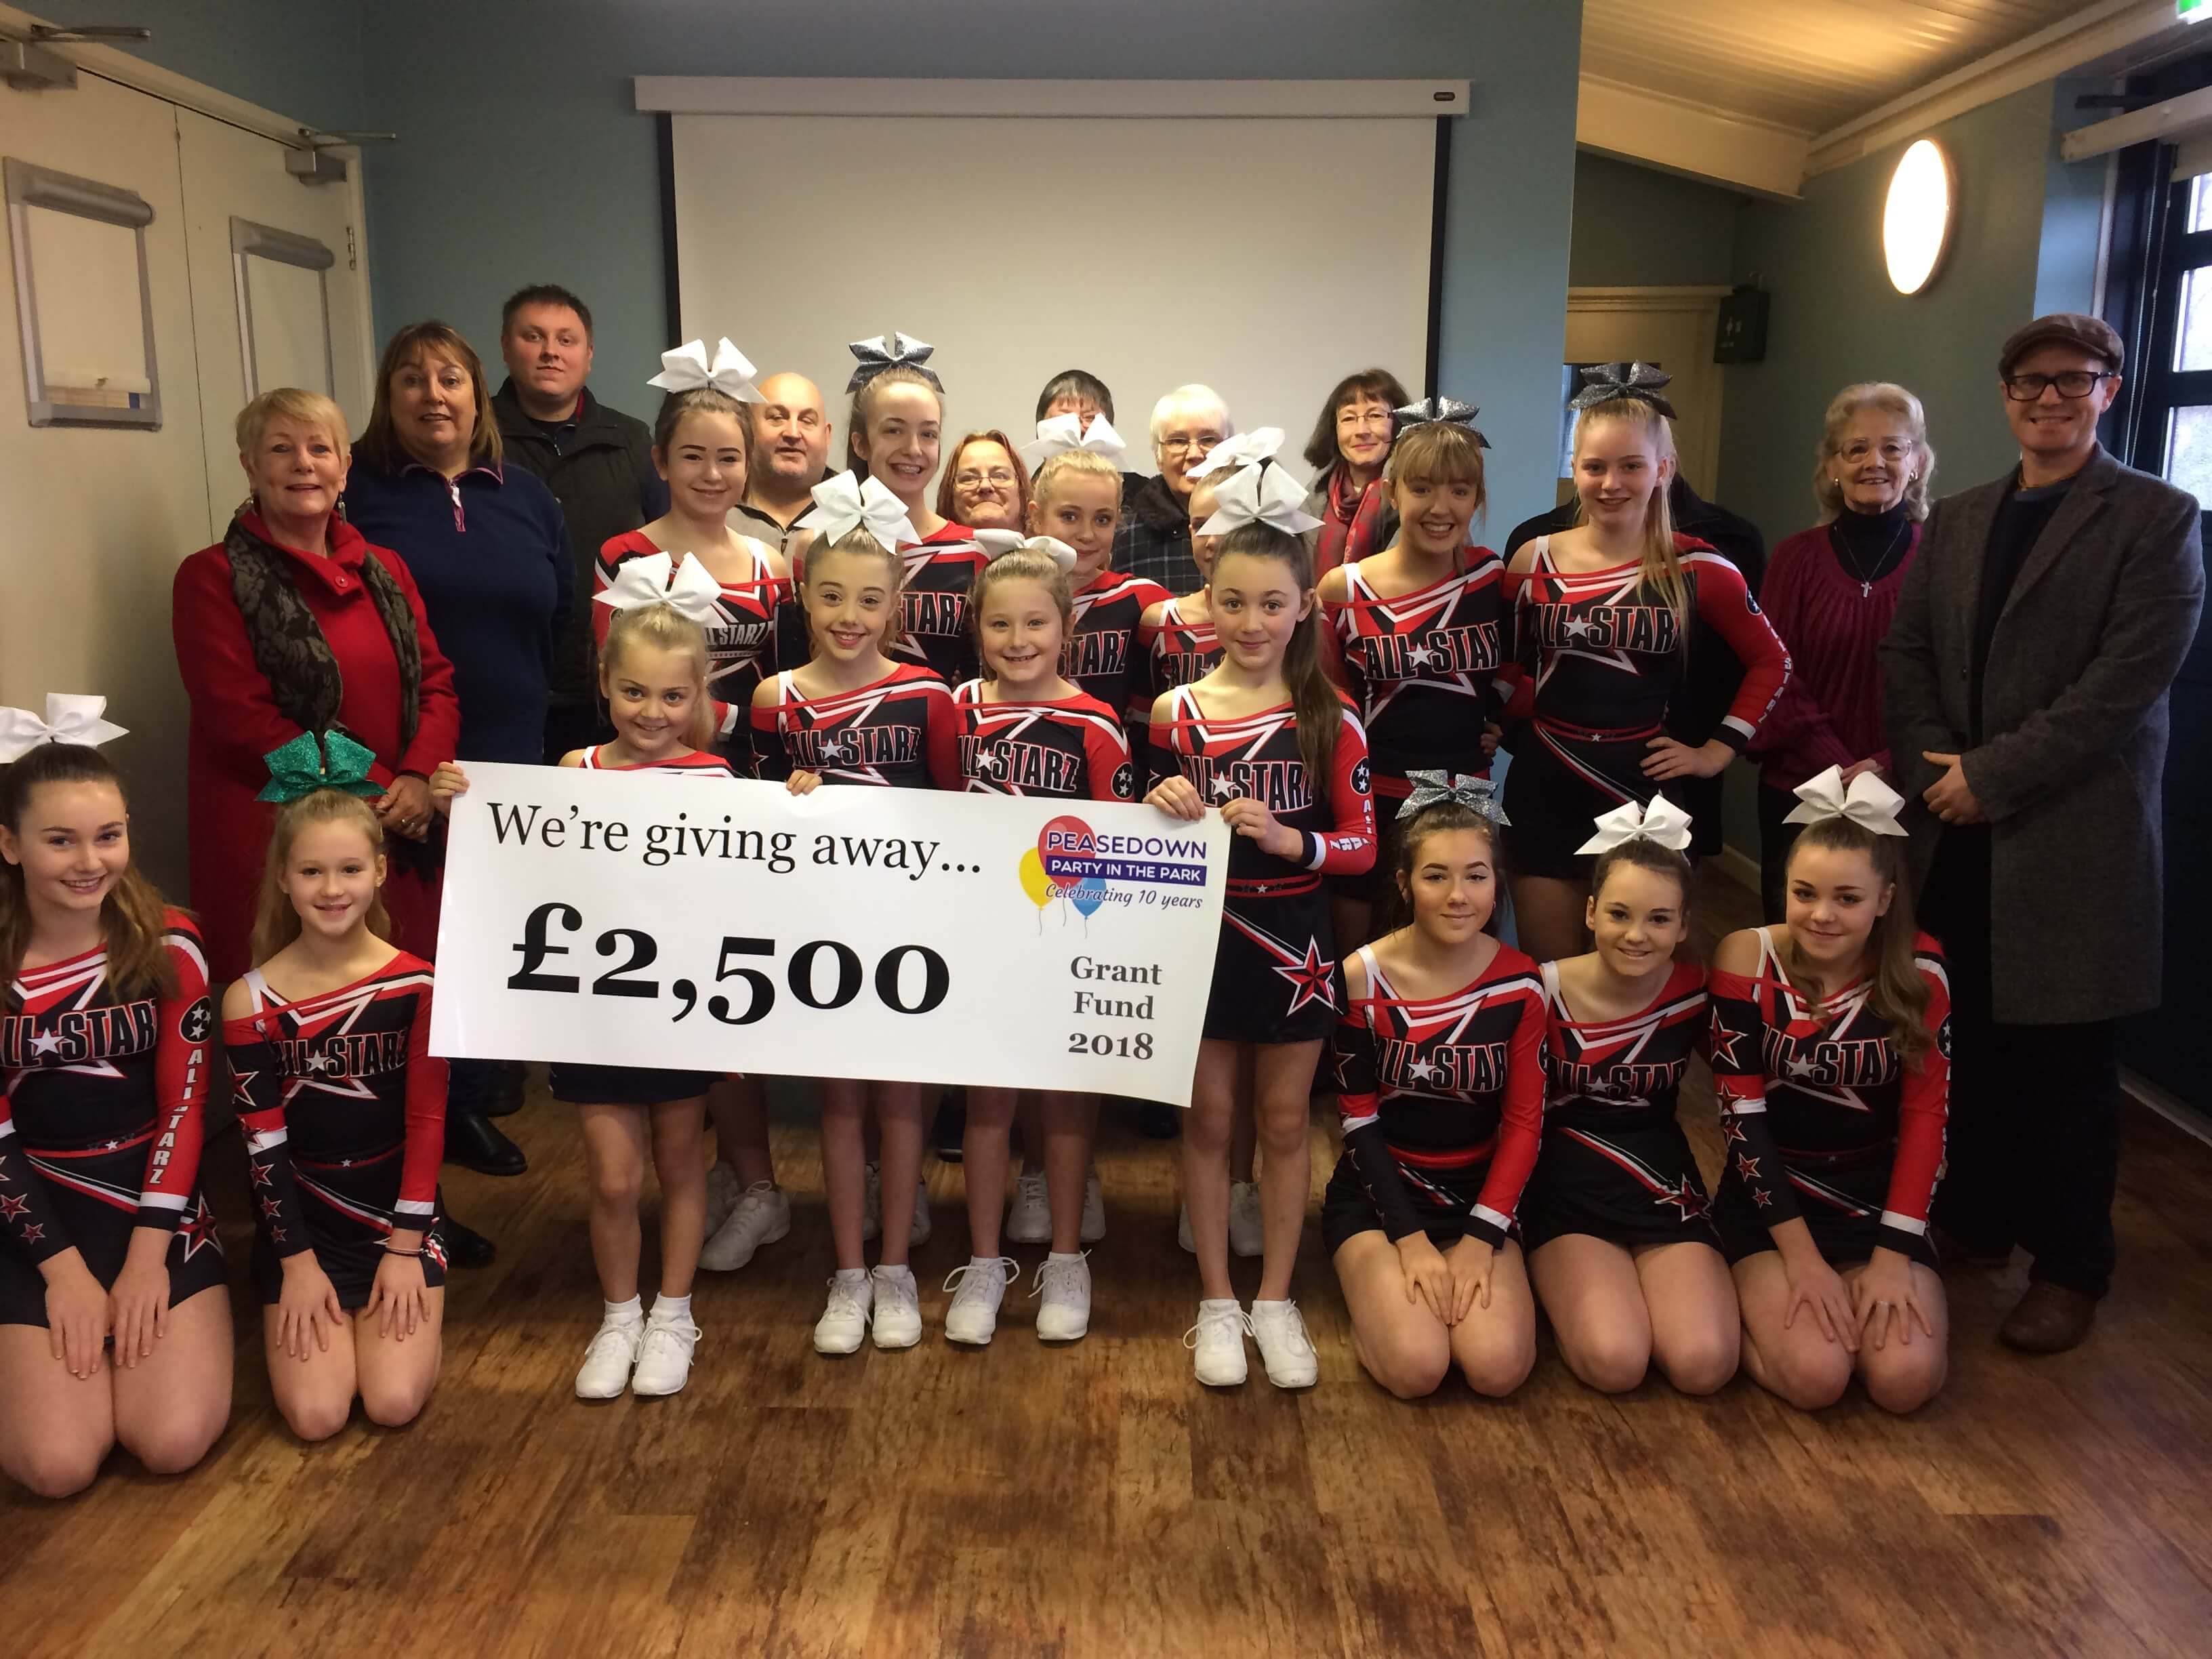 Peasedown party grant scheme to give away £2,500